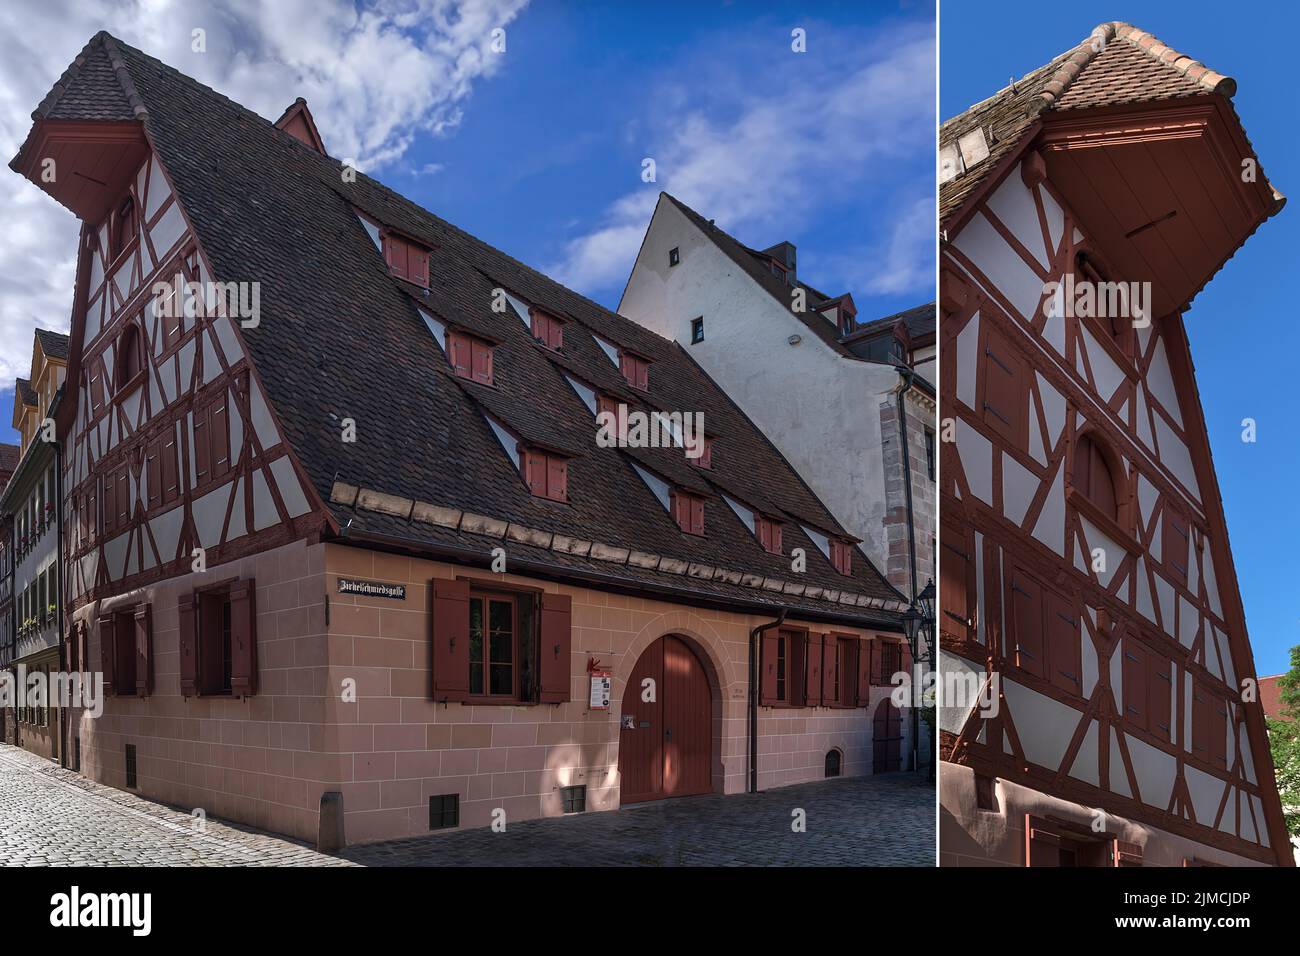 Historic half-timbered house, now a cultural barn, completely renovated by the Friends of the Old Town, Zirkelschmiedsgasse 30, Nuremberg, Middle Stock Photo